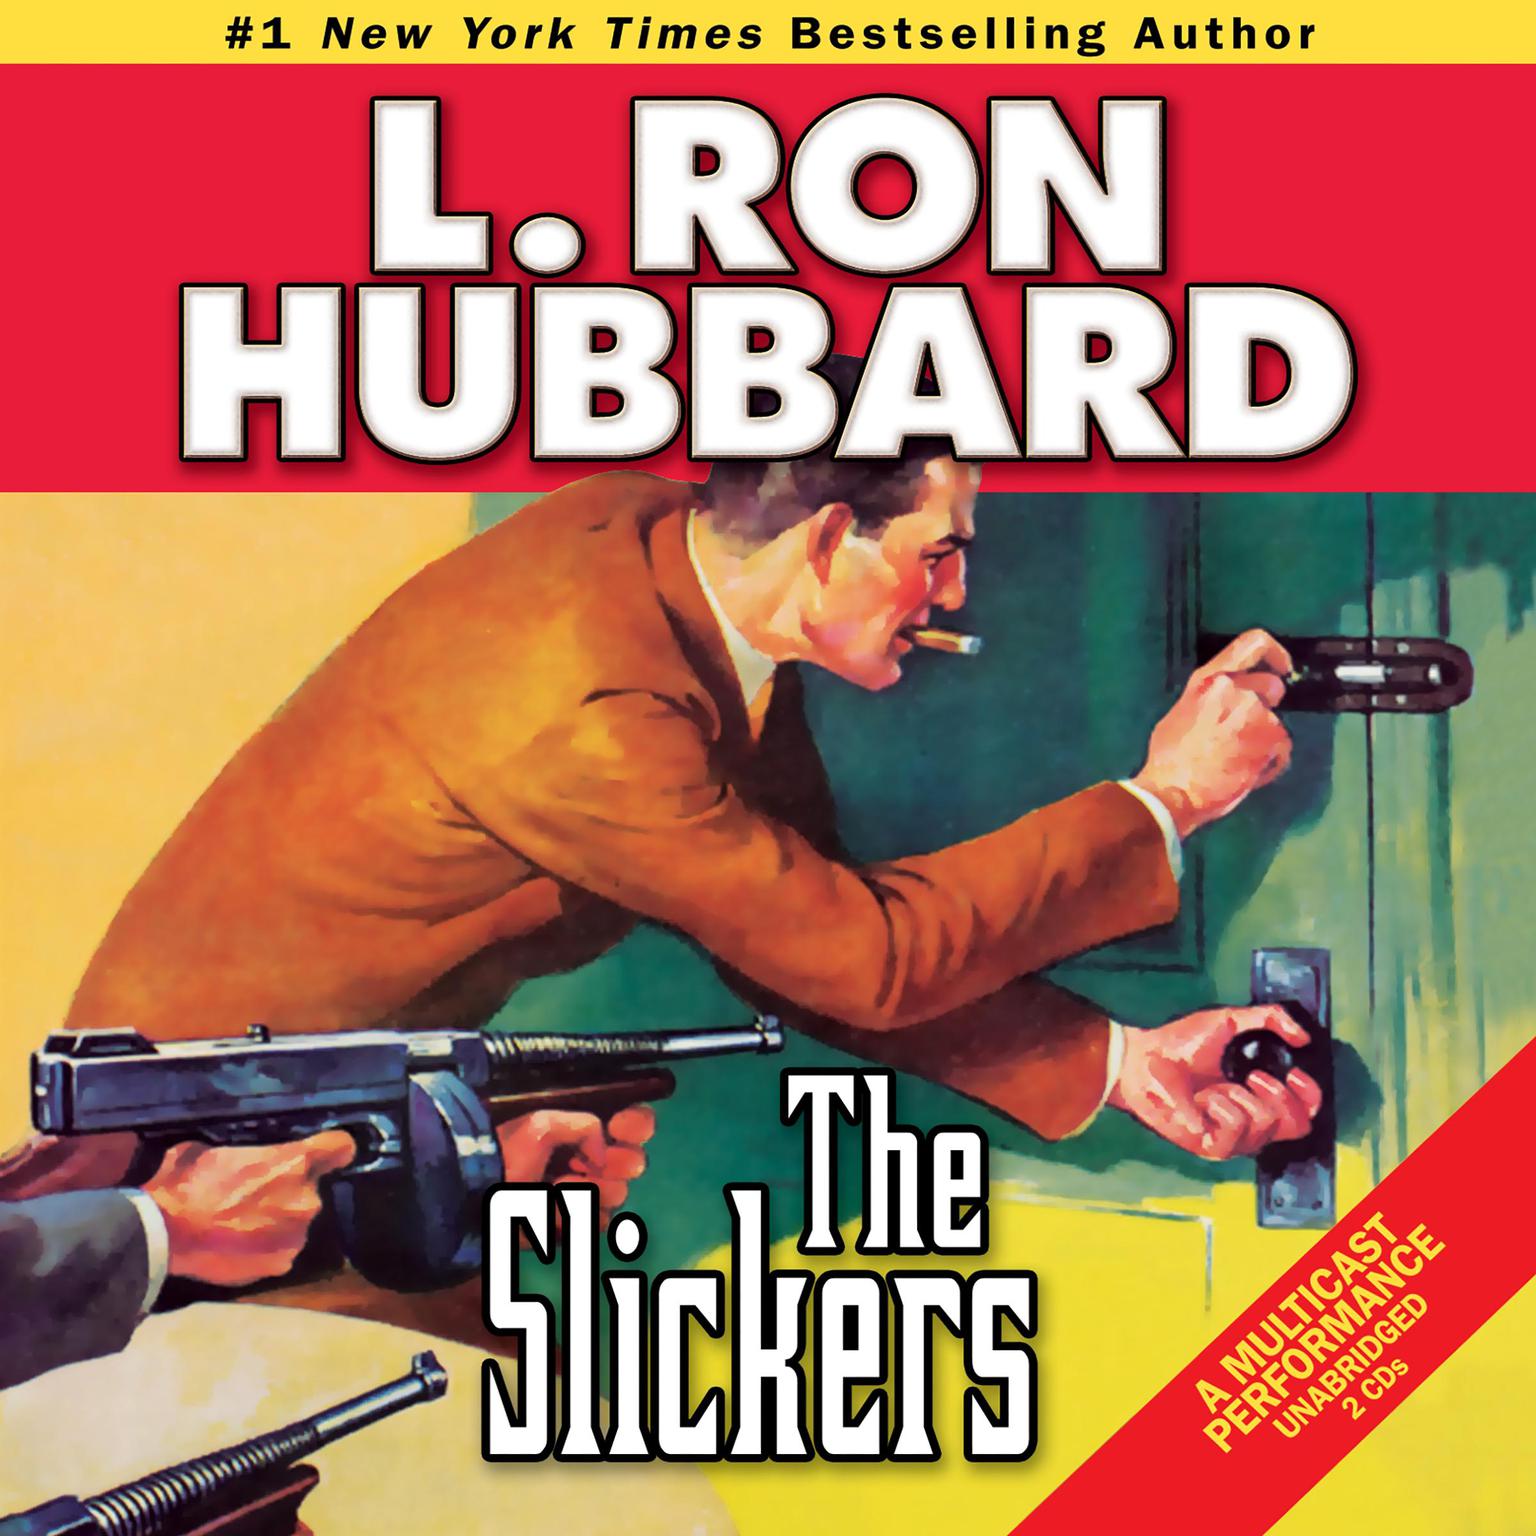 The Slickers Audiobook, by L. Ron Hubbard